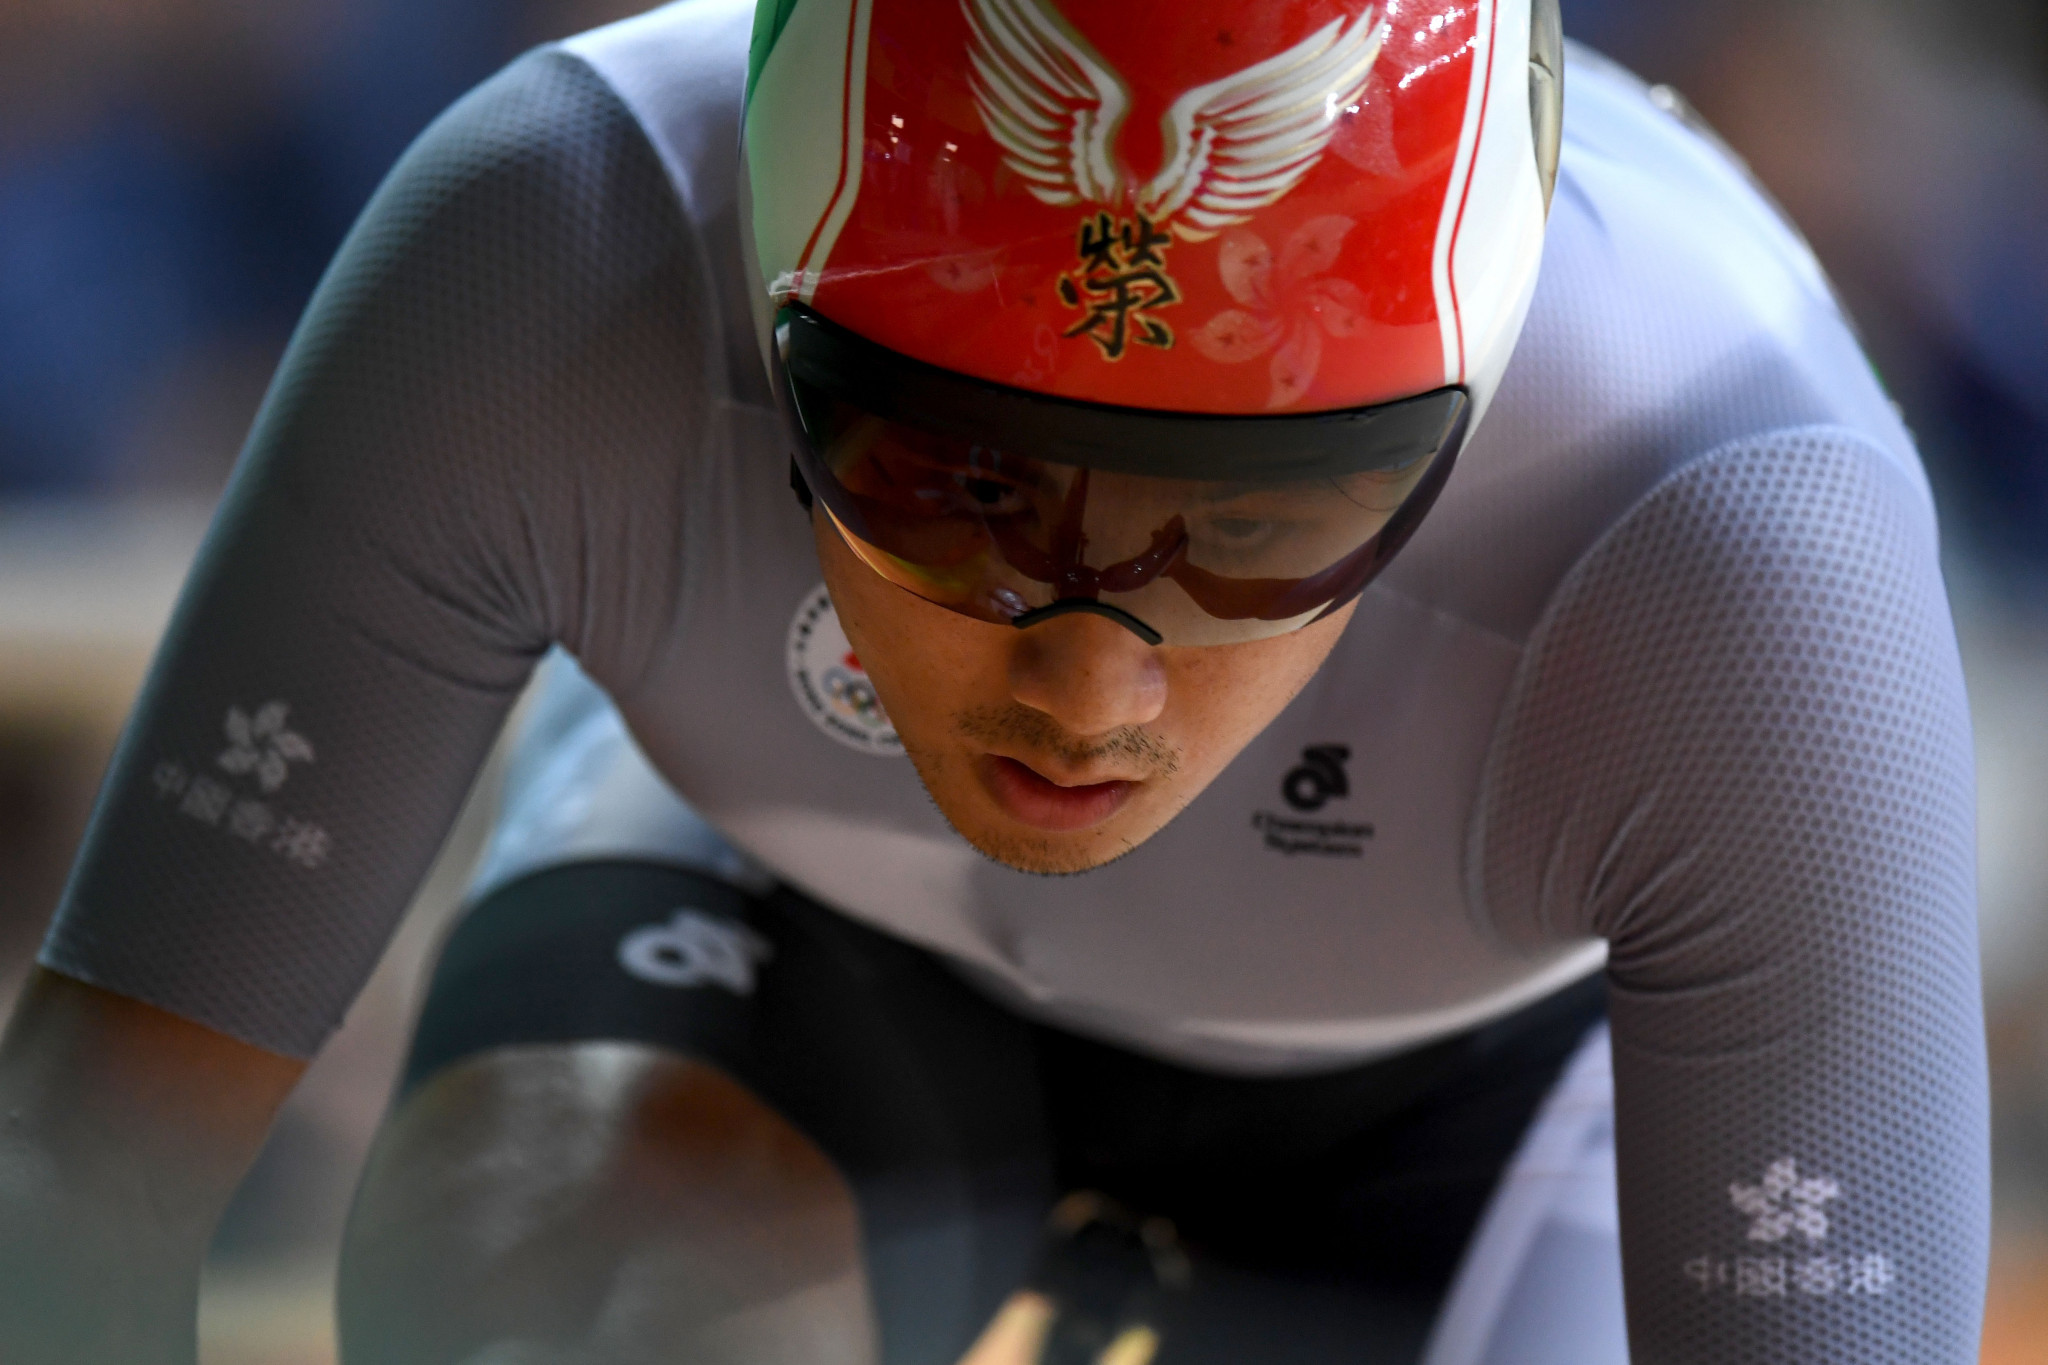 Hong Kong's Leung Chun Wing won the men's omnium title on the last day of track cycling competition ©Getty Images